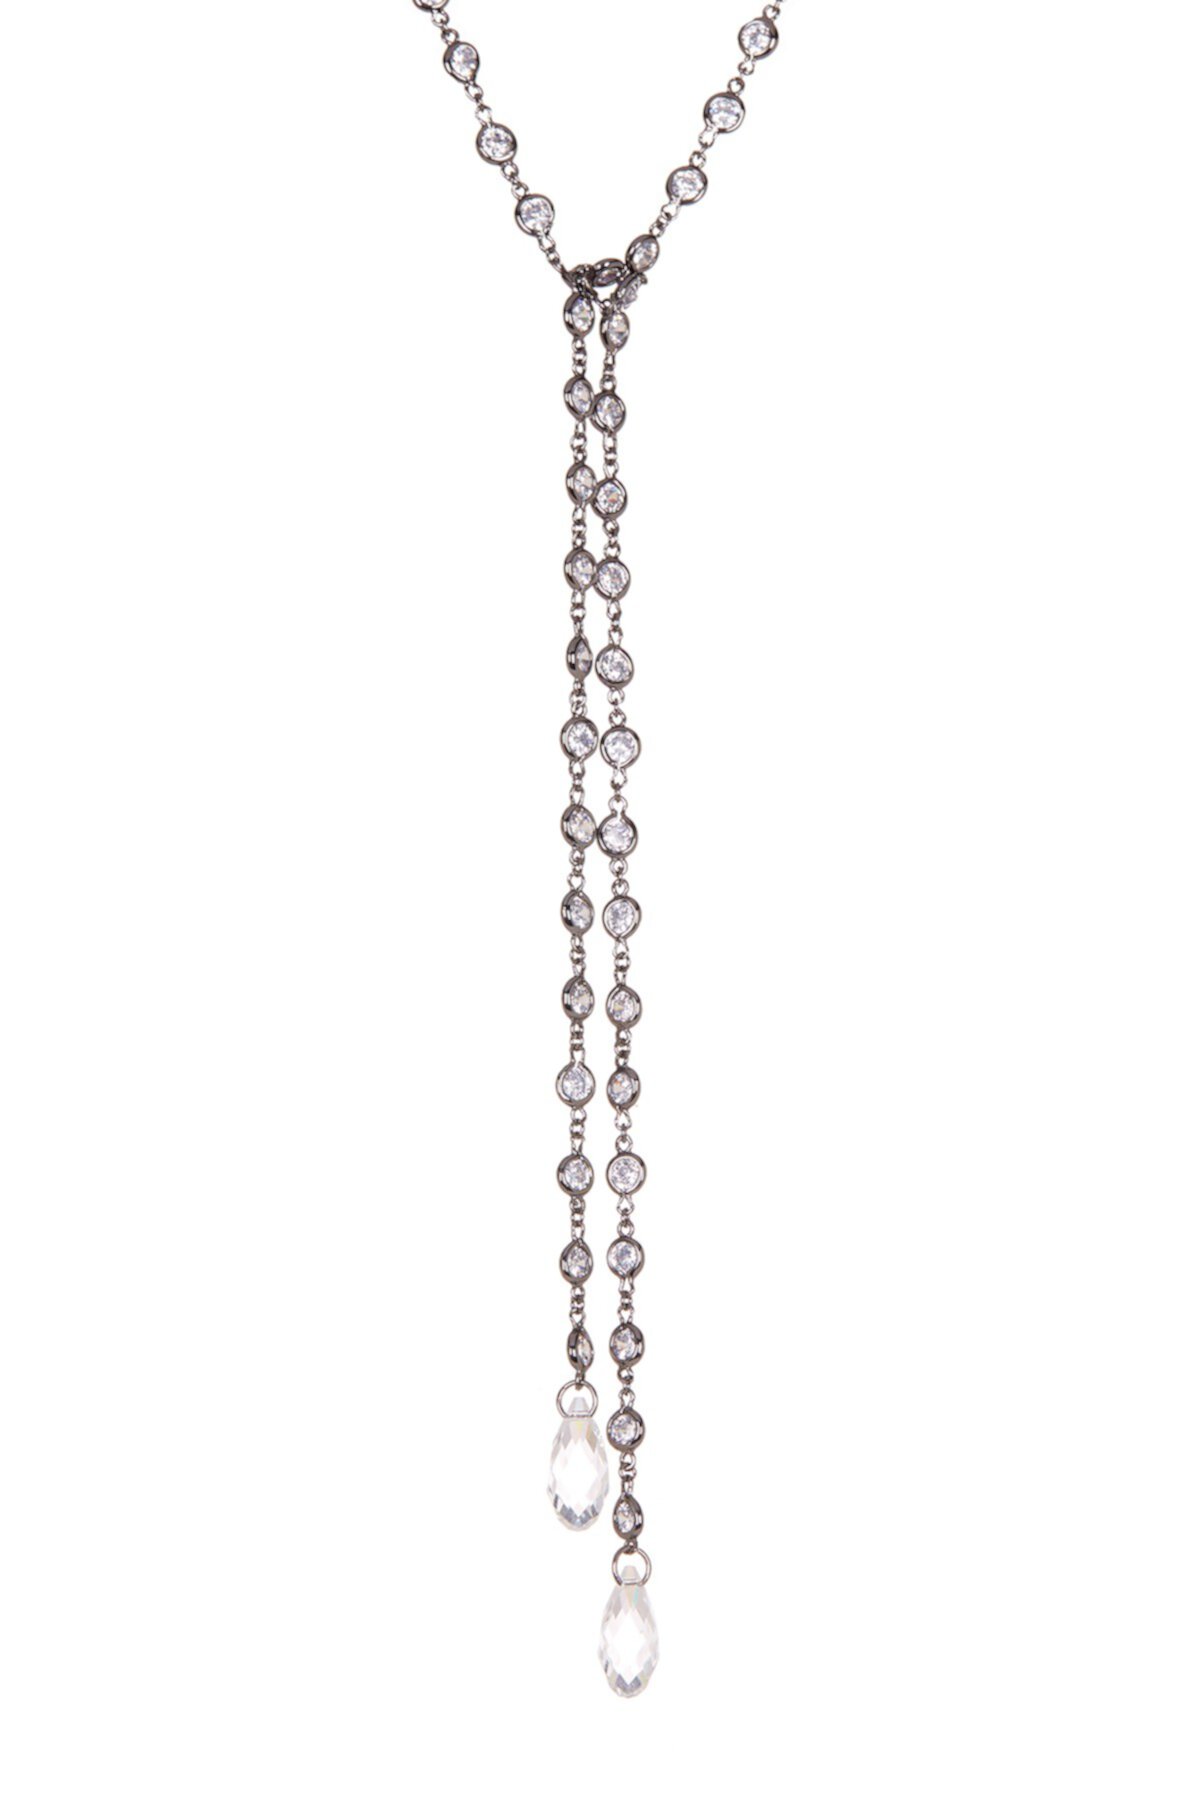 Black Rhodium Plated CZ 60" Lariat Necklace CZ By Kenneth Jay Lane